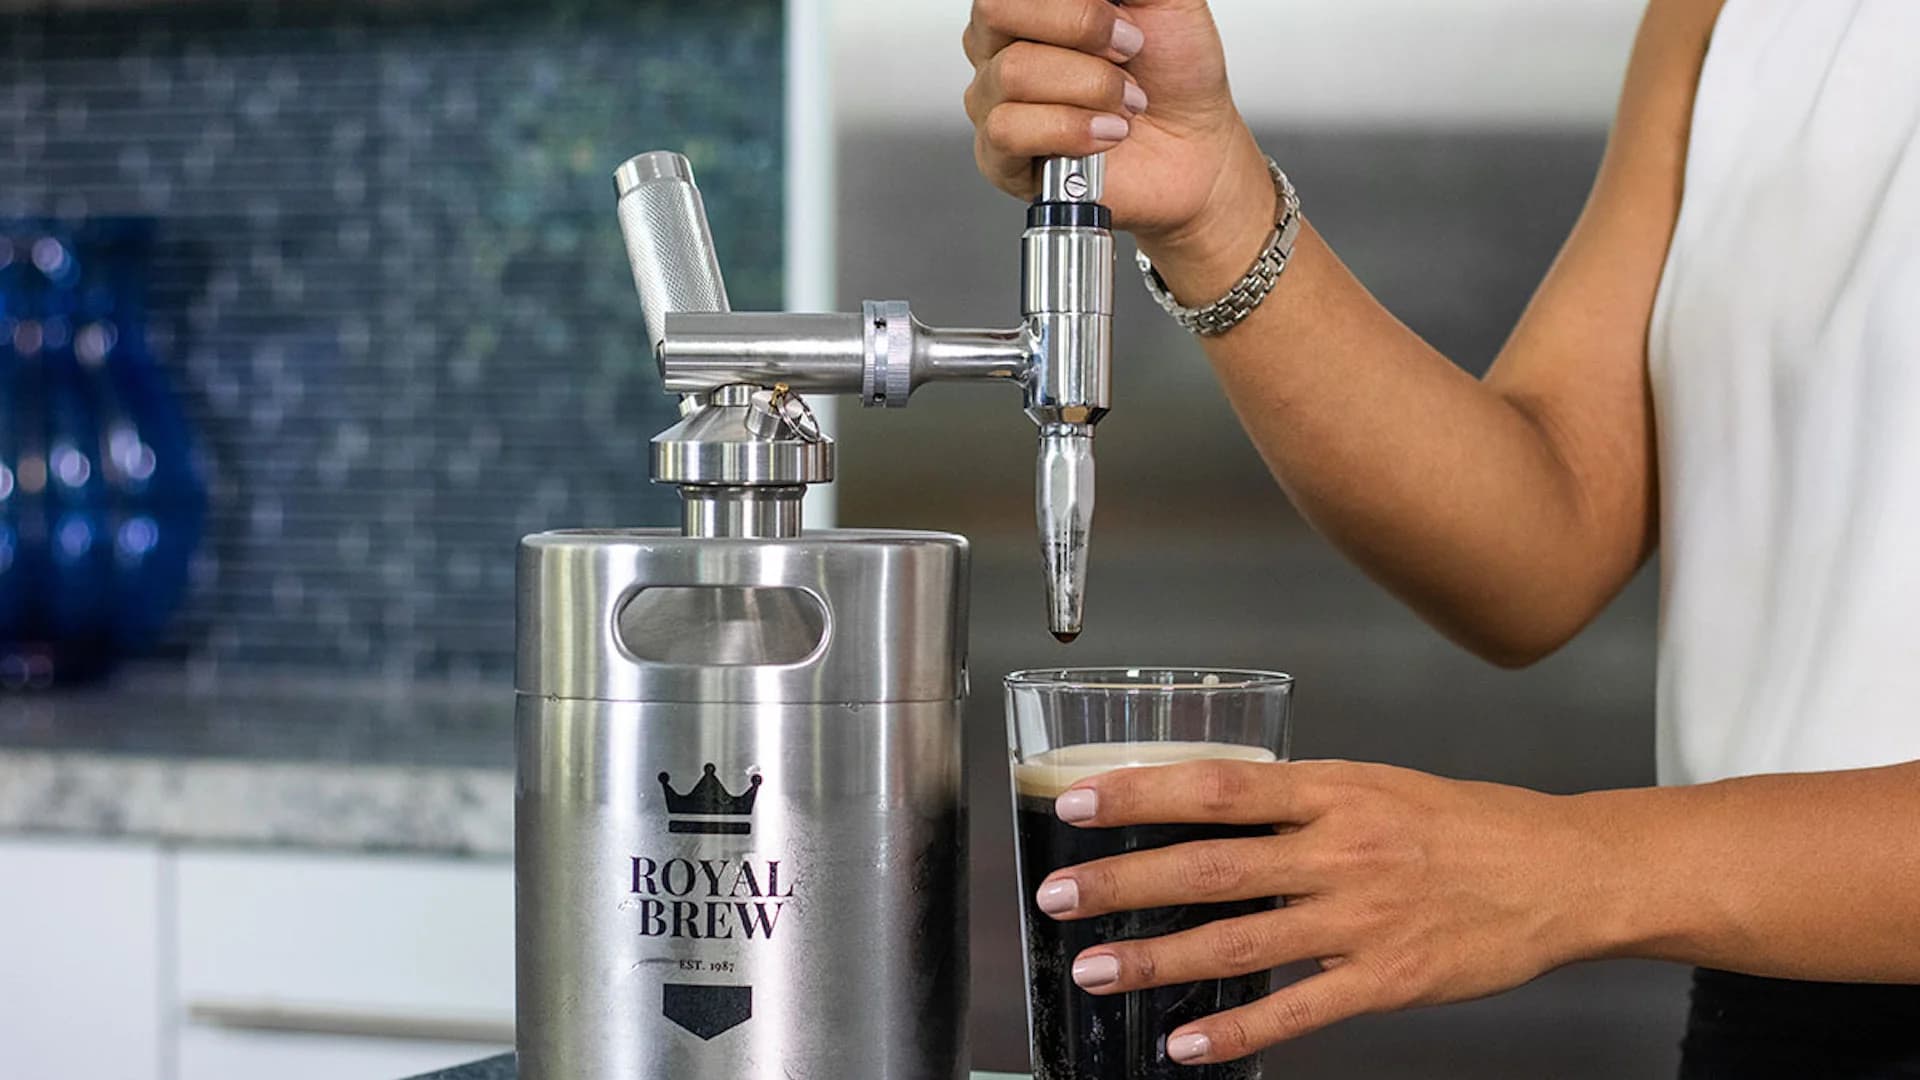 Enhance your morning routine with $50 off of this nitro brew coffee maker